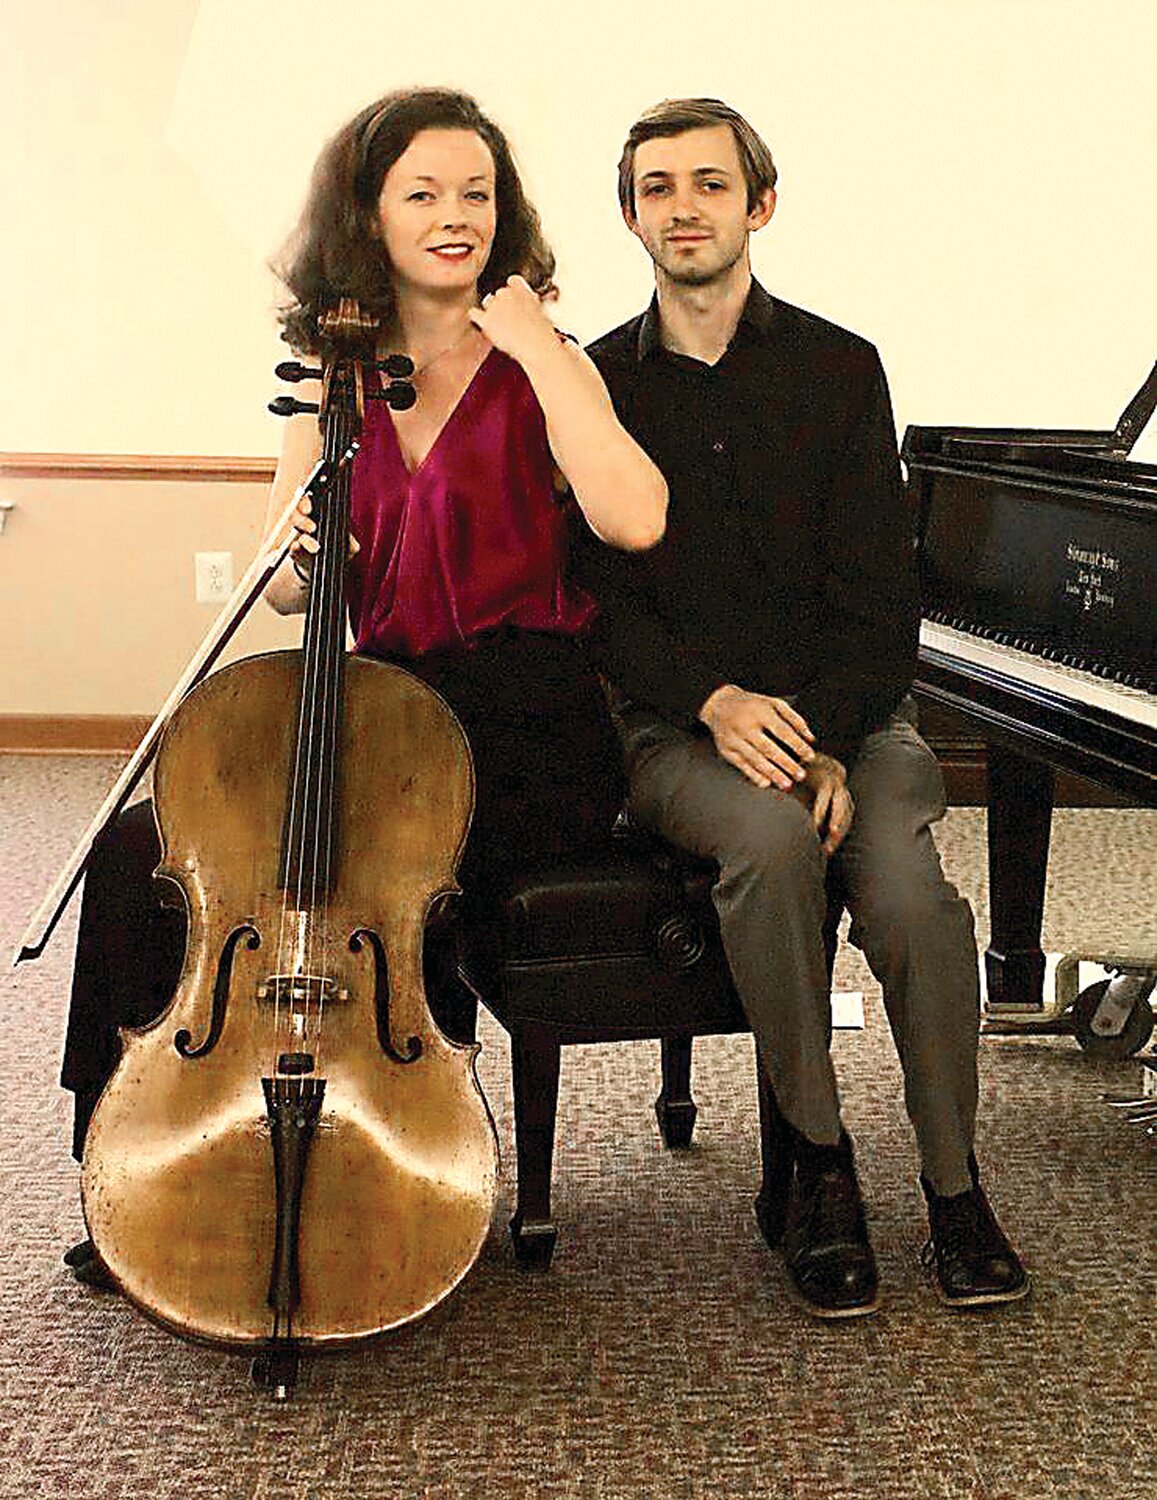 Husband and wife Noelle Casella Grand and Sebastian Grand will give a concert at St. Philip’s, New Hope.